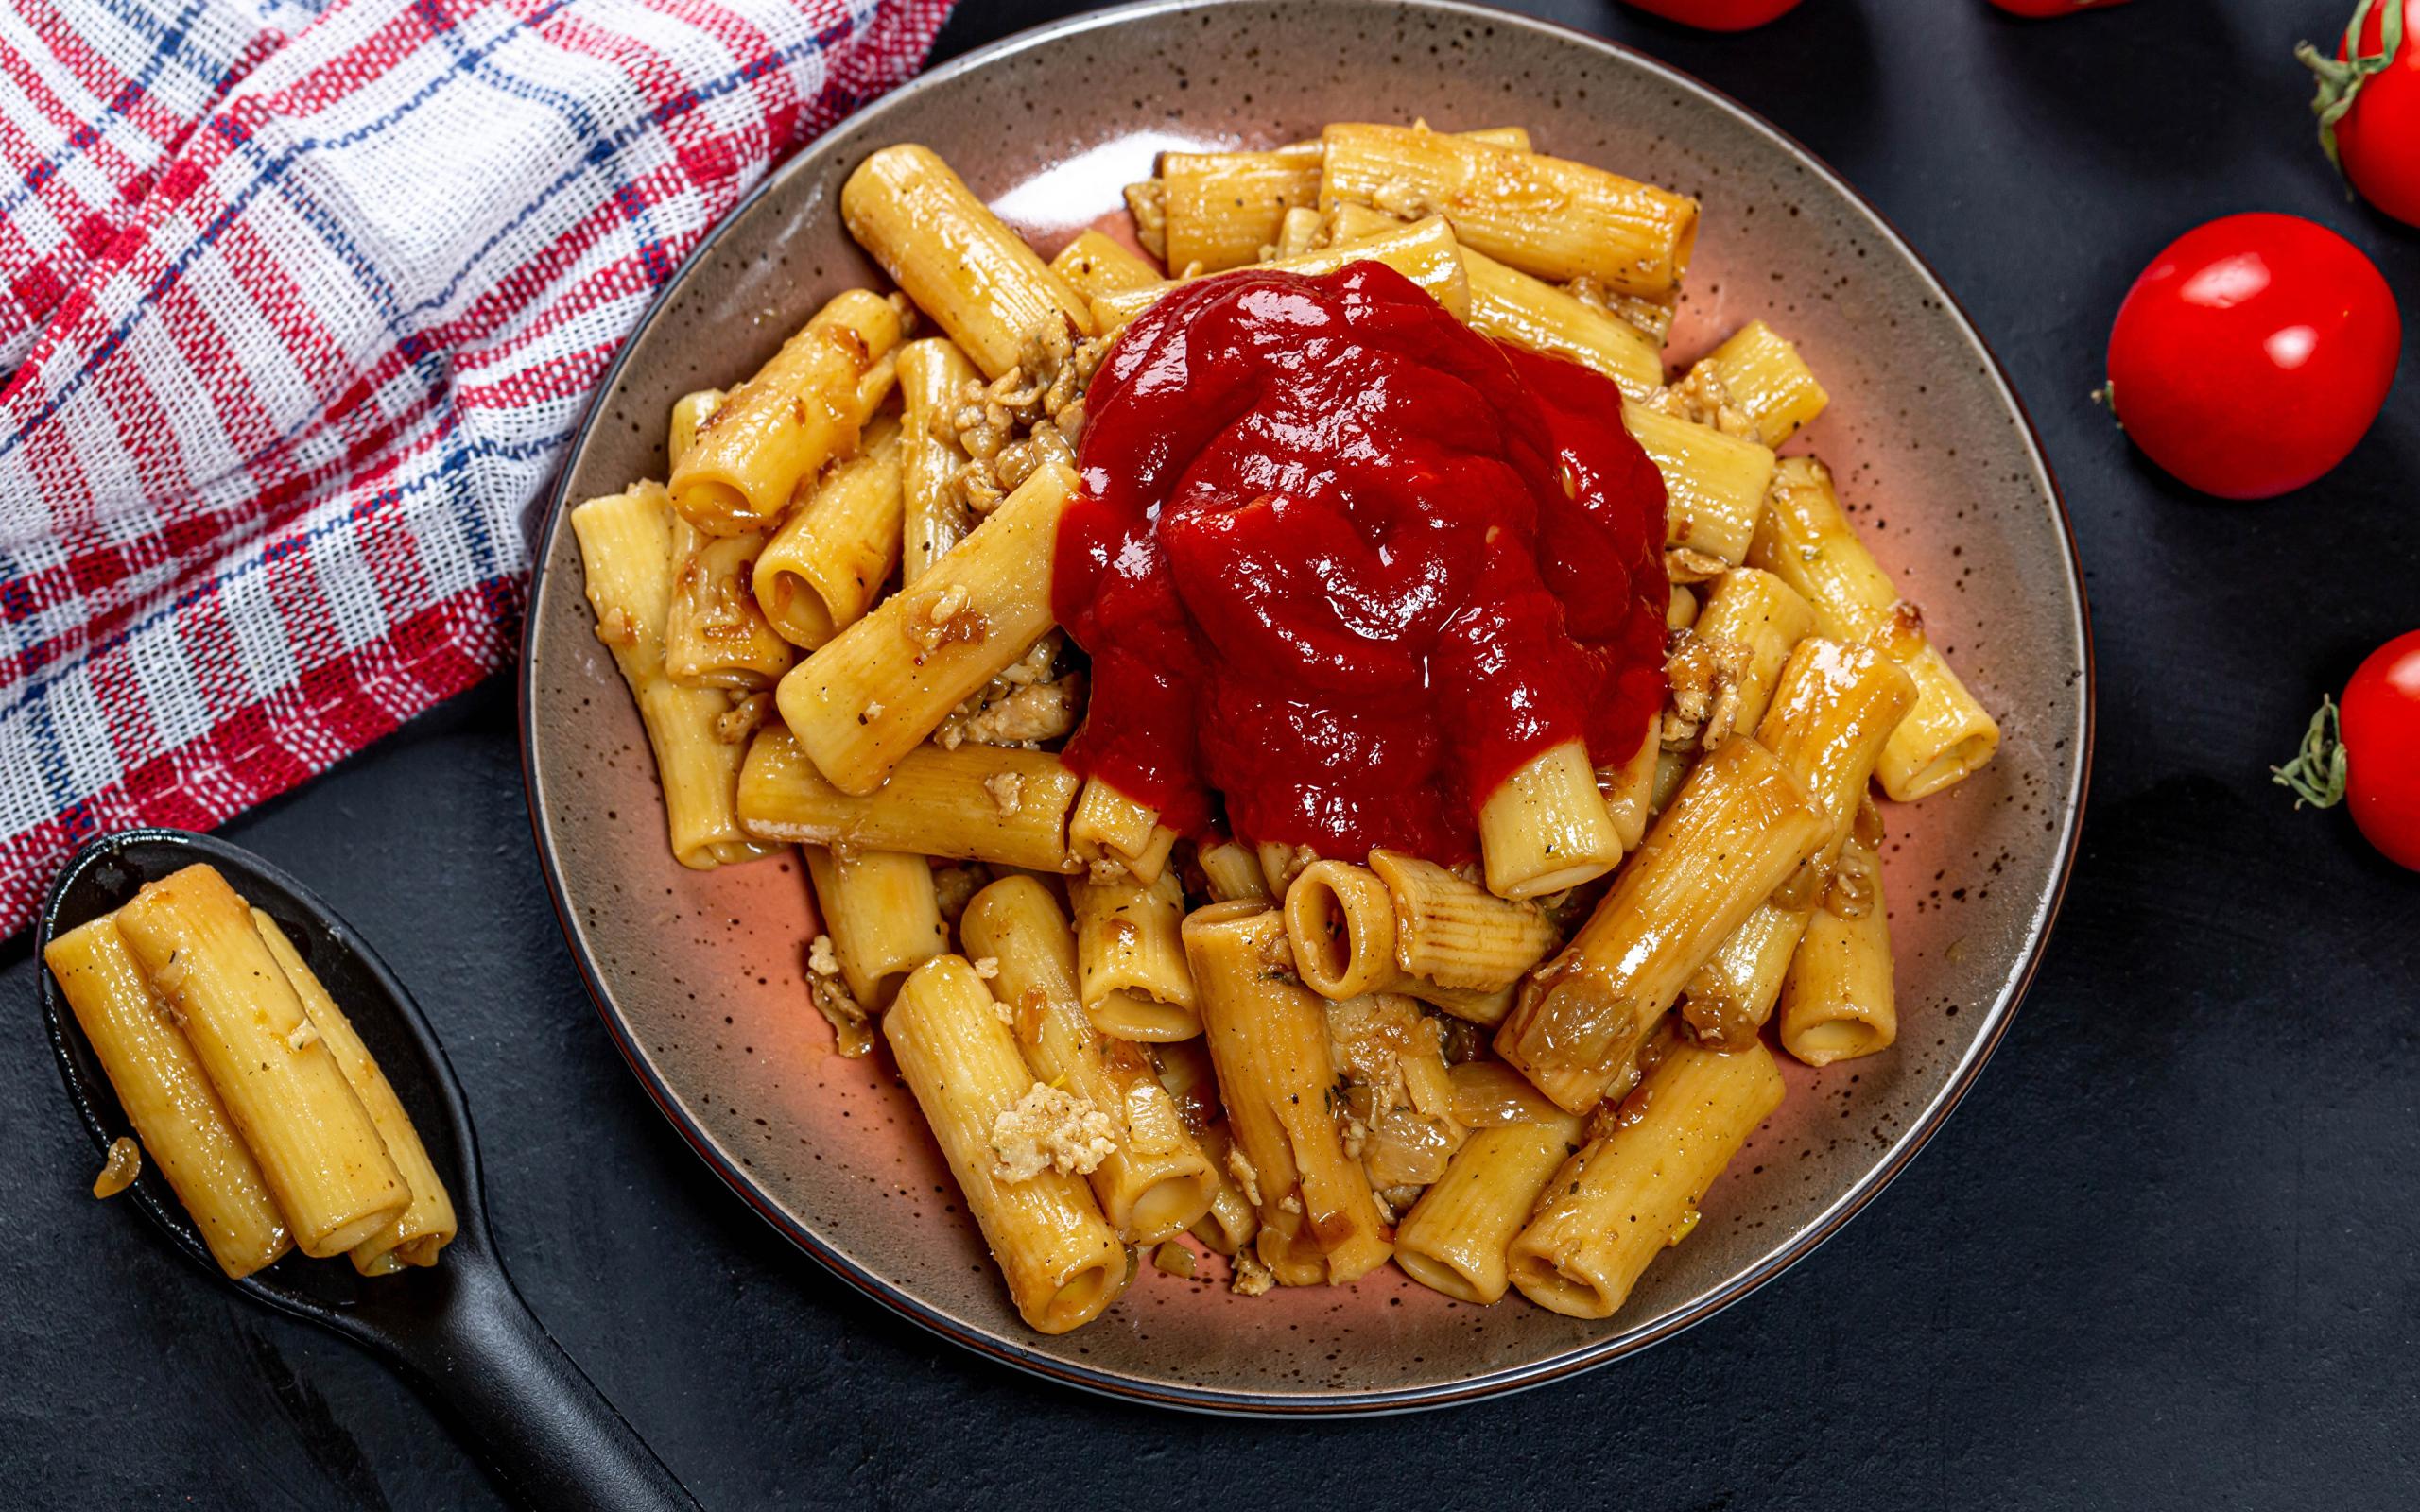 Pasta with meat and ketchup on the table